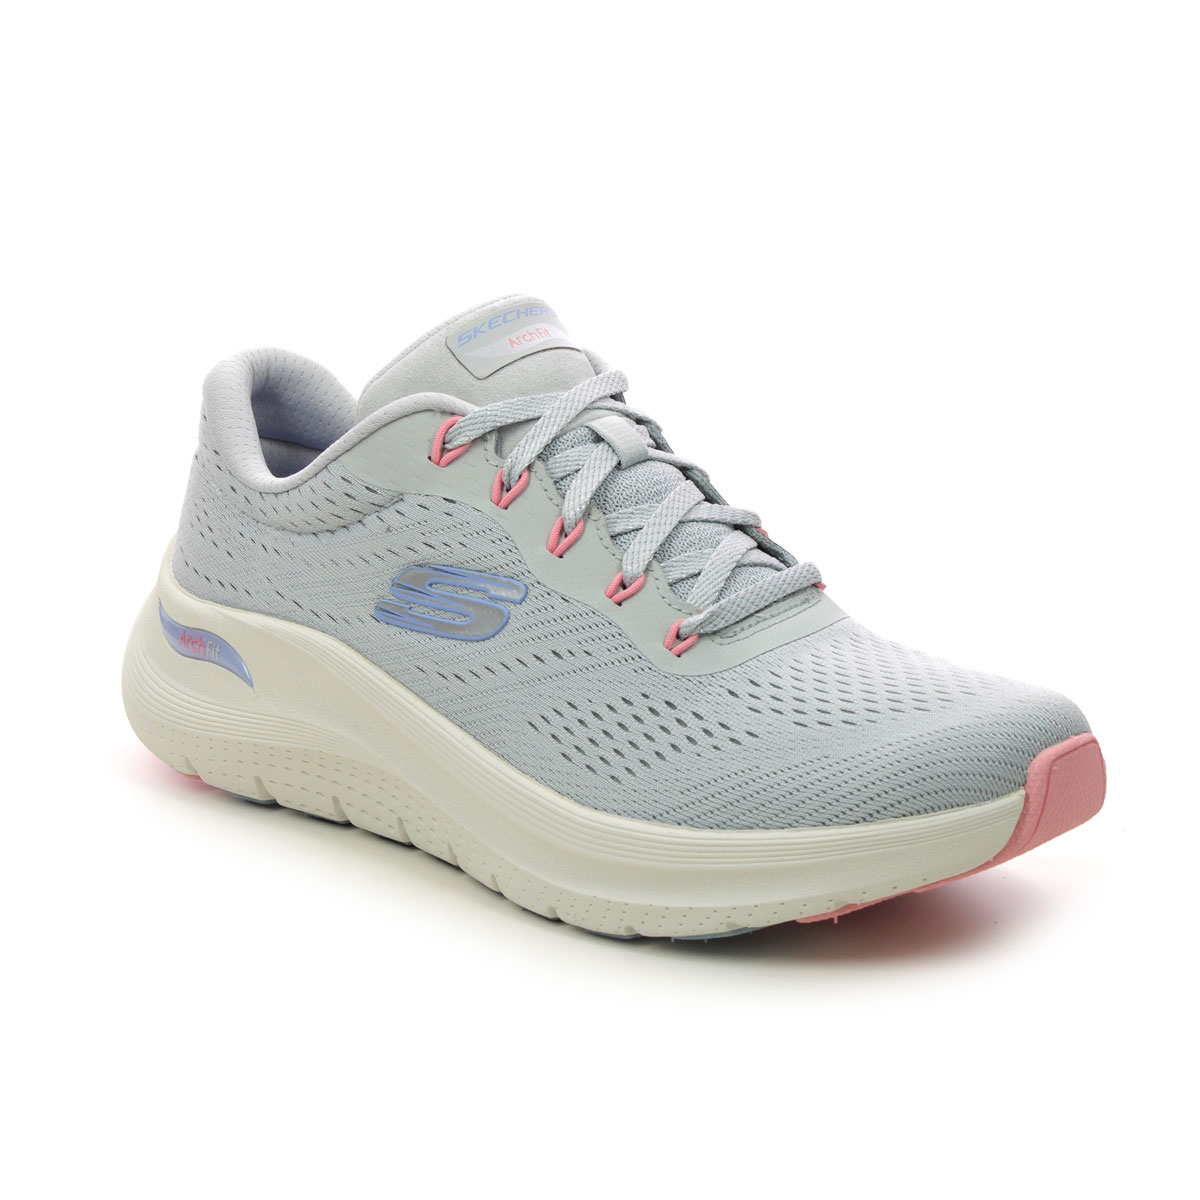 Skechers Arch Fit 2 Lace LGMT Light Grey Multi Womens trainers 150051 in a Plain Textile in Size 7